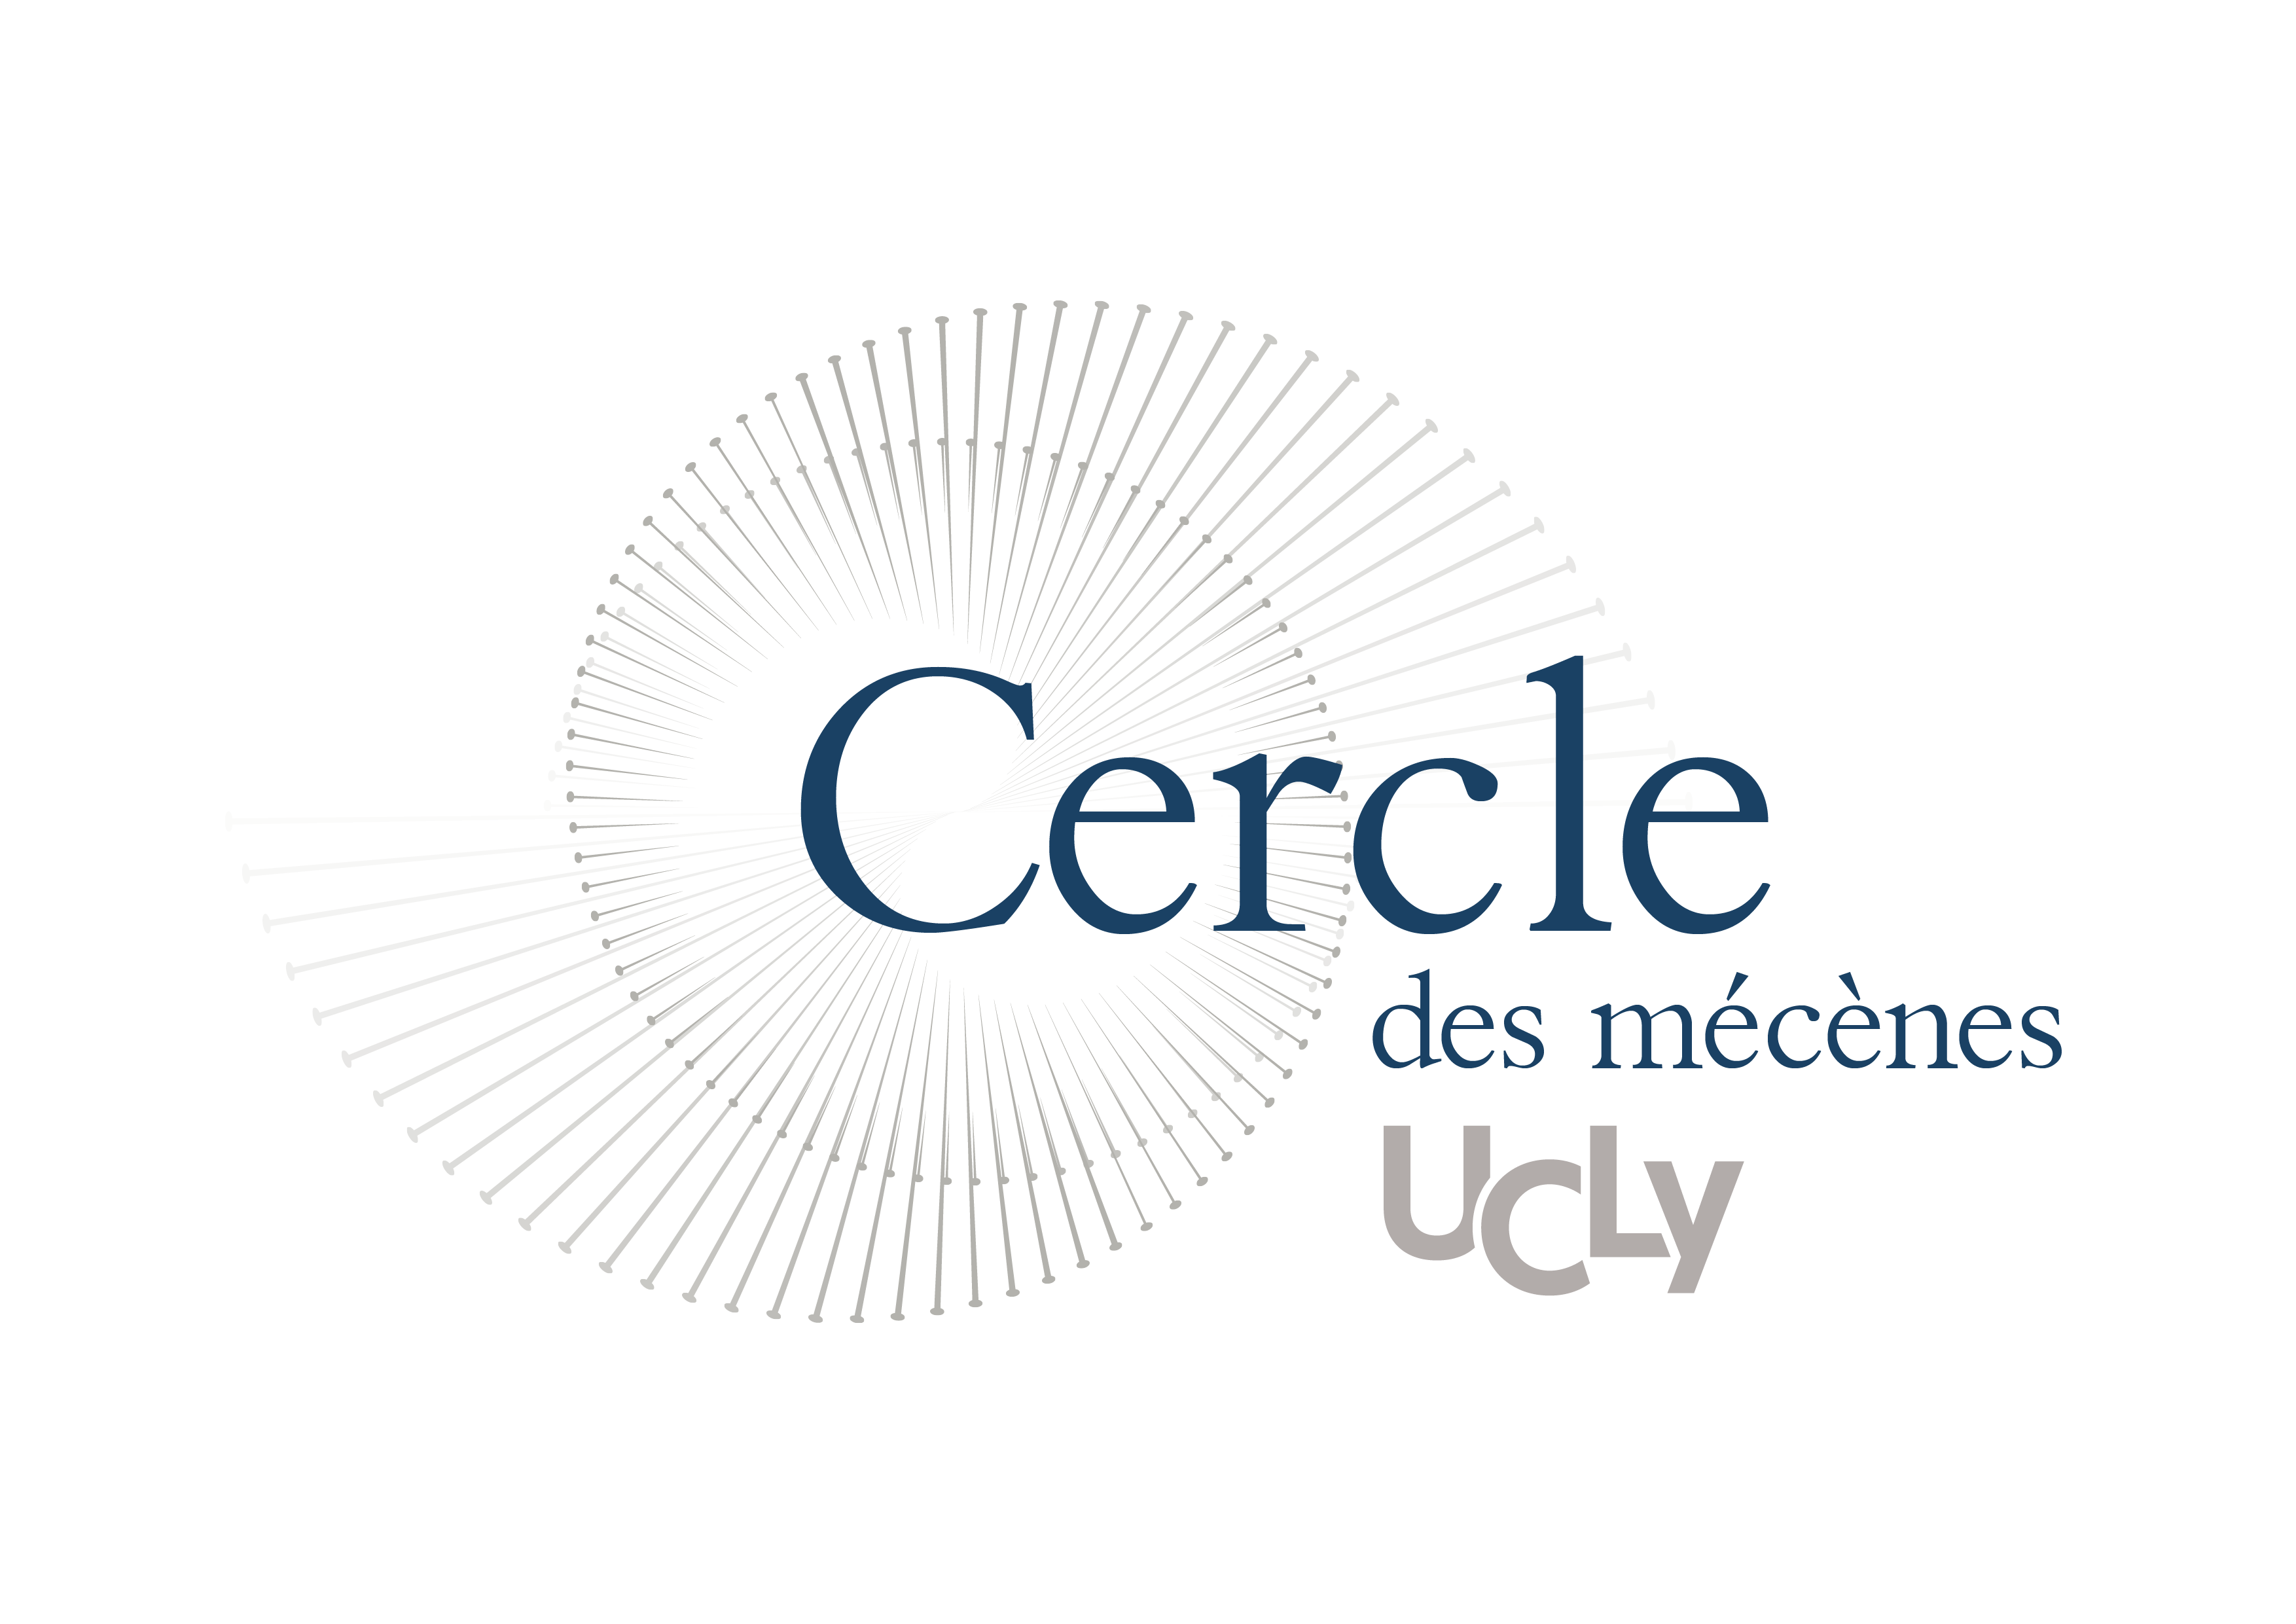 https://www.ucly.fr/wp-content/uploads/2023/03/logotype_cercle_des_mecenes_ucly_-_version_bleue1.png